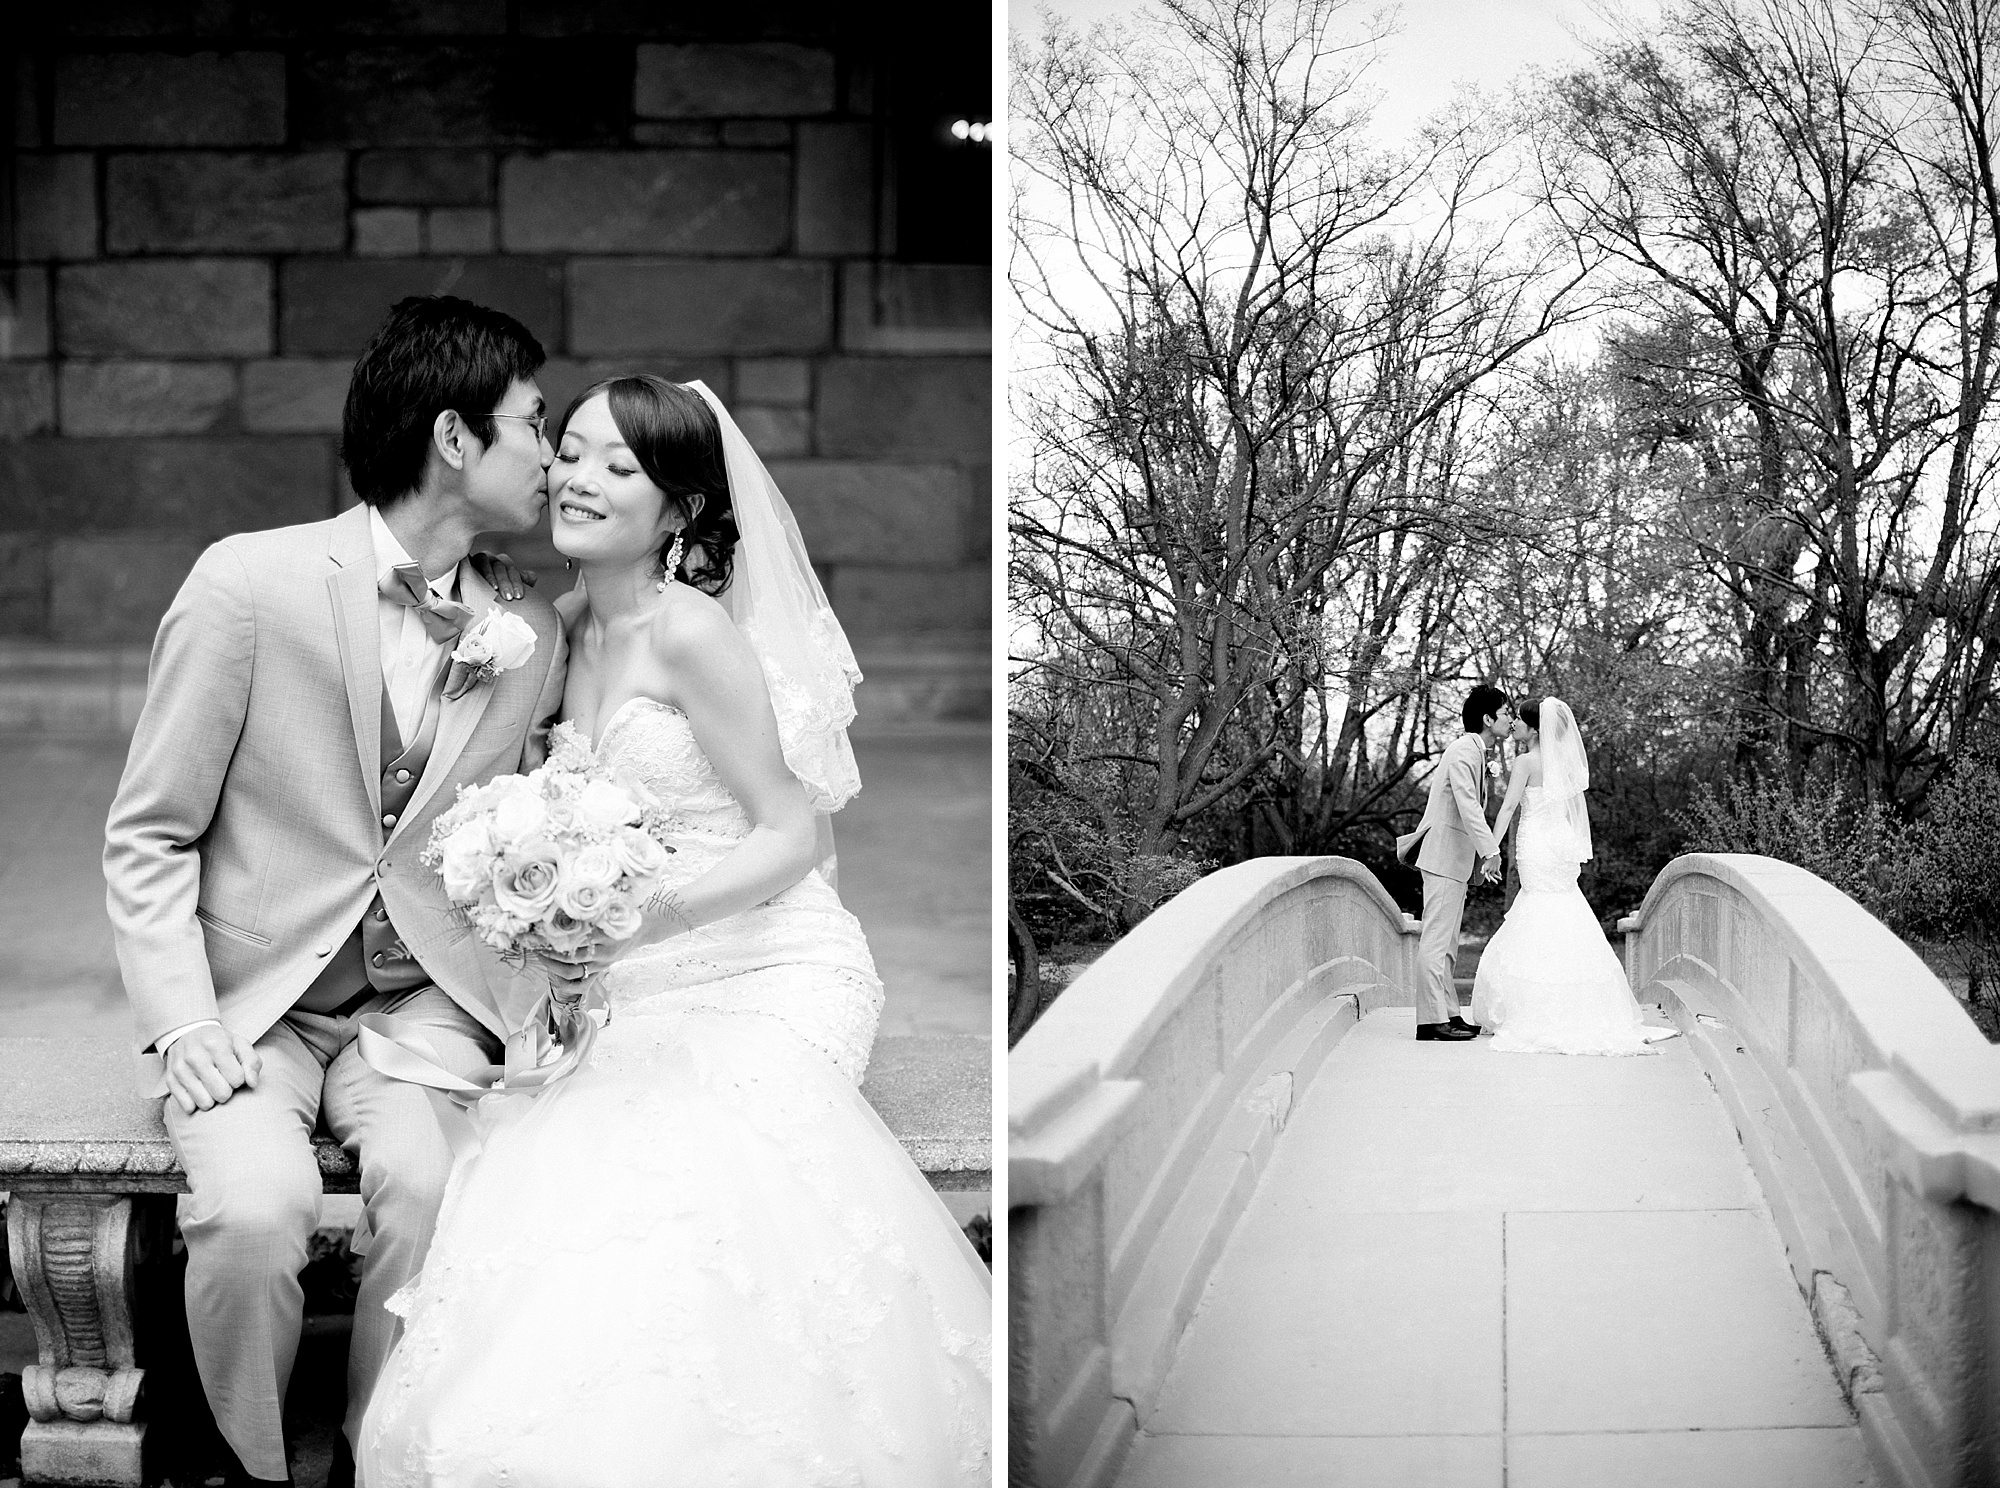 An elegant spring wedding at University of Michigan in Ann Arbor, Michigan by Breanne Rochelle Photography.